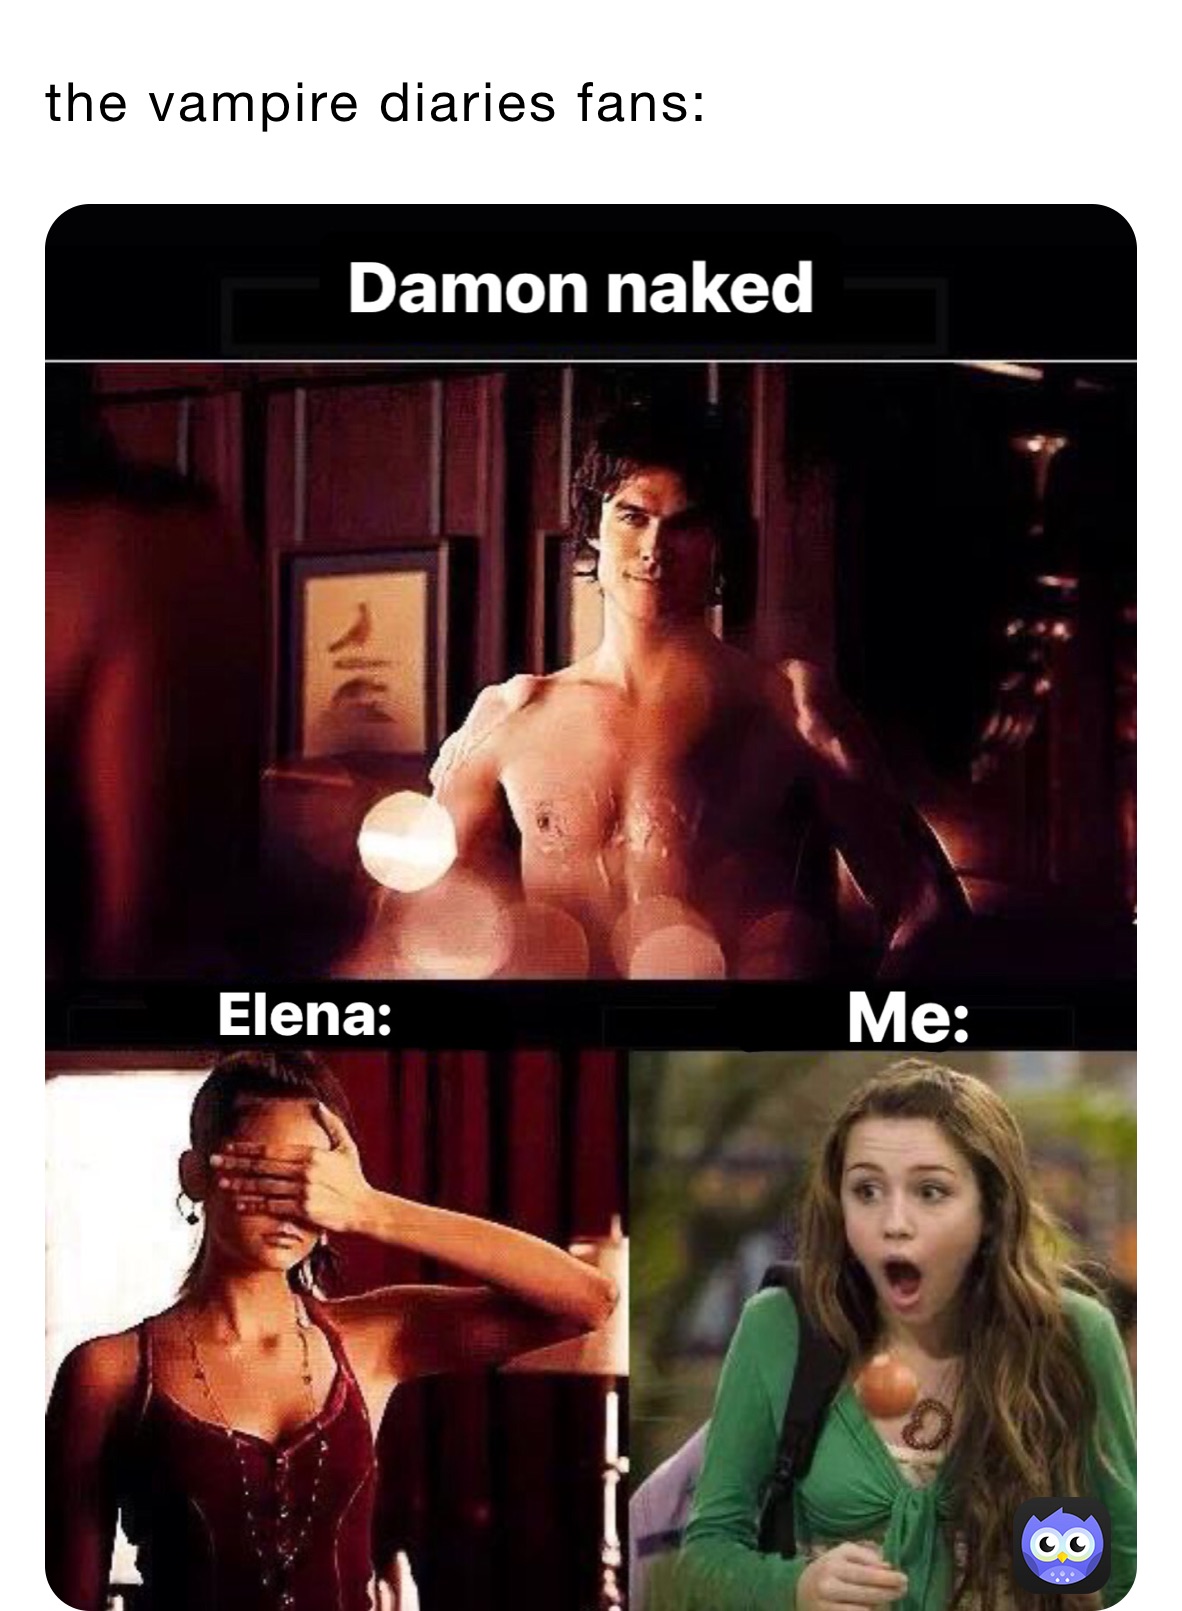 the vampire diaries fans: